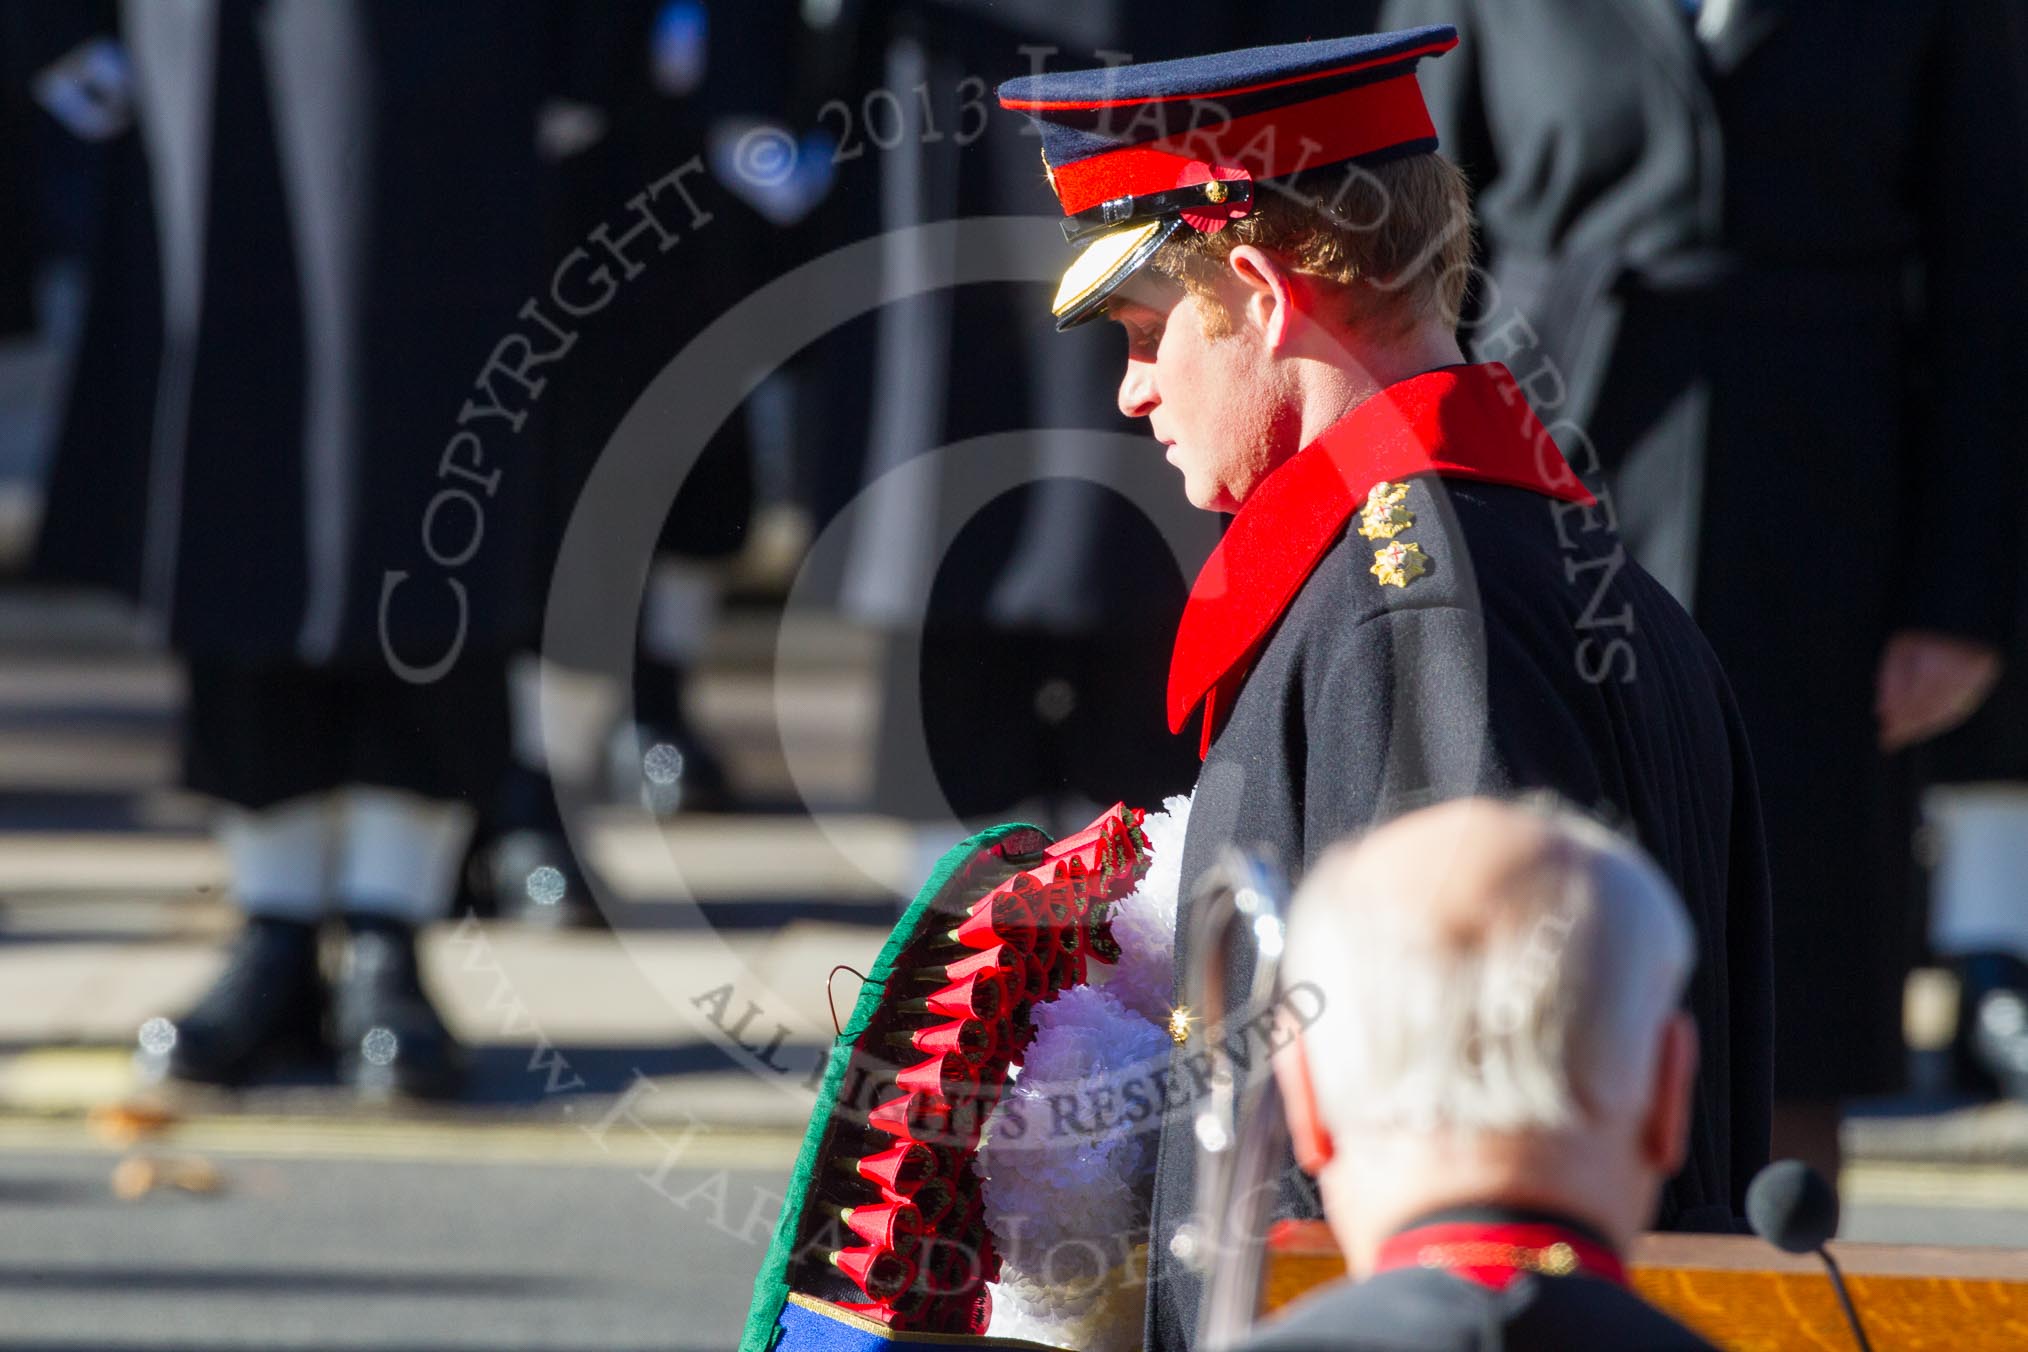 HRH Prince Henry of Wales, about to lay his wreath at the Cenotaph.